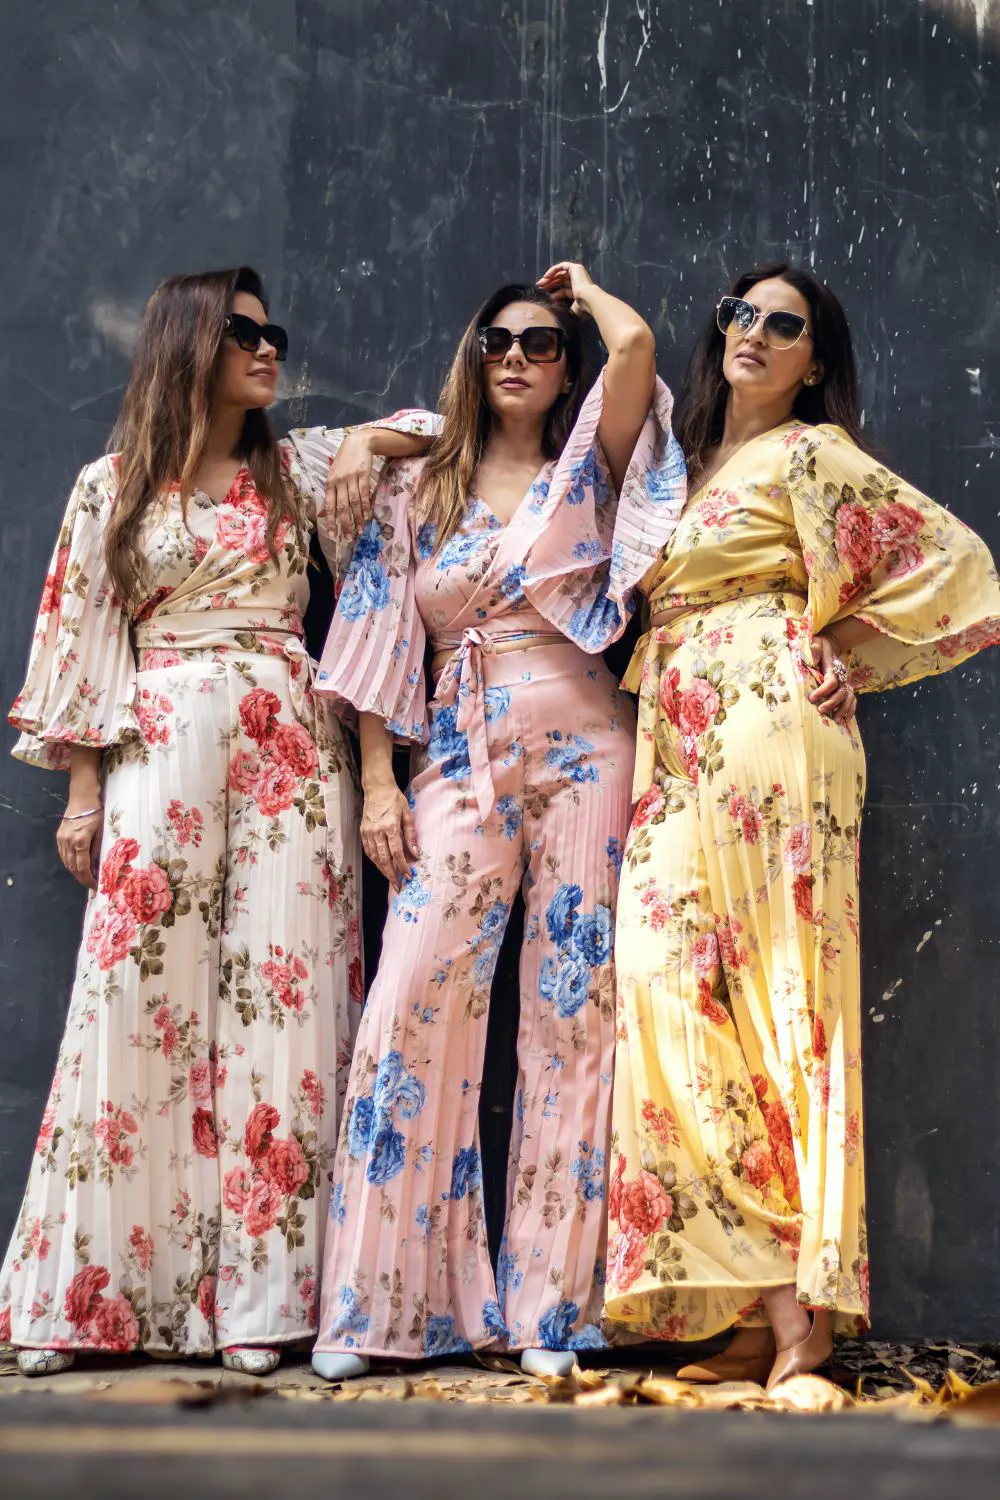 3 Women in Floral Dresses